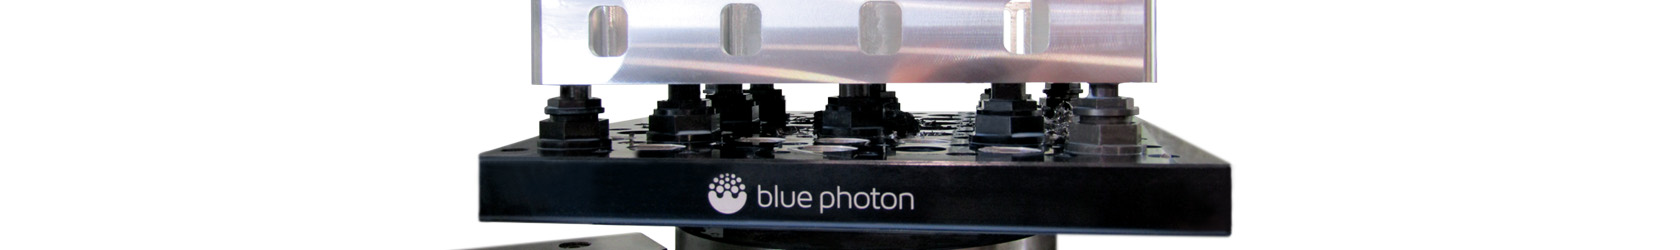 Photo of a Blue Photon gripper fixture securely holding a part